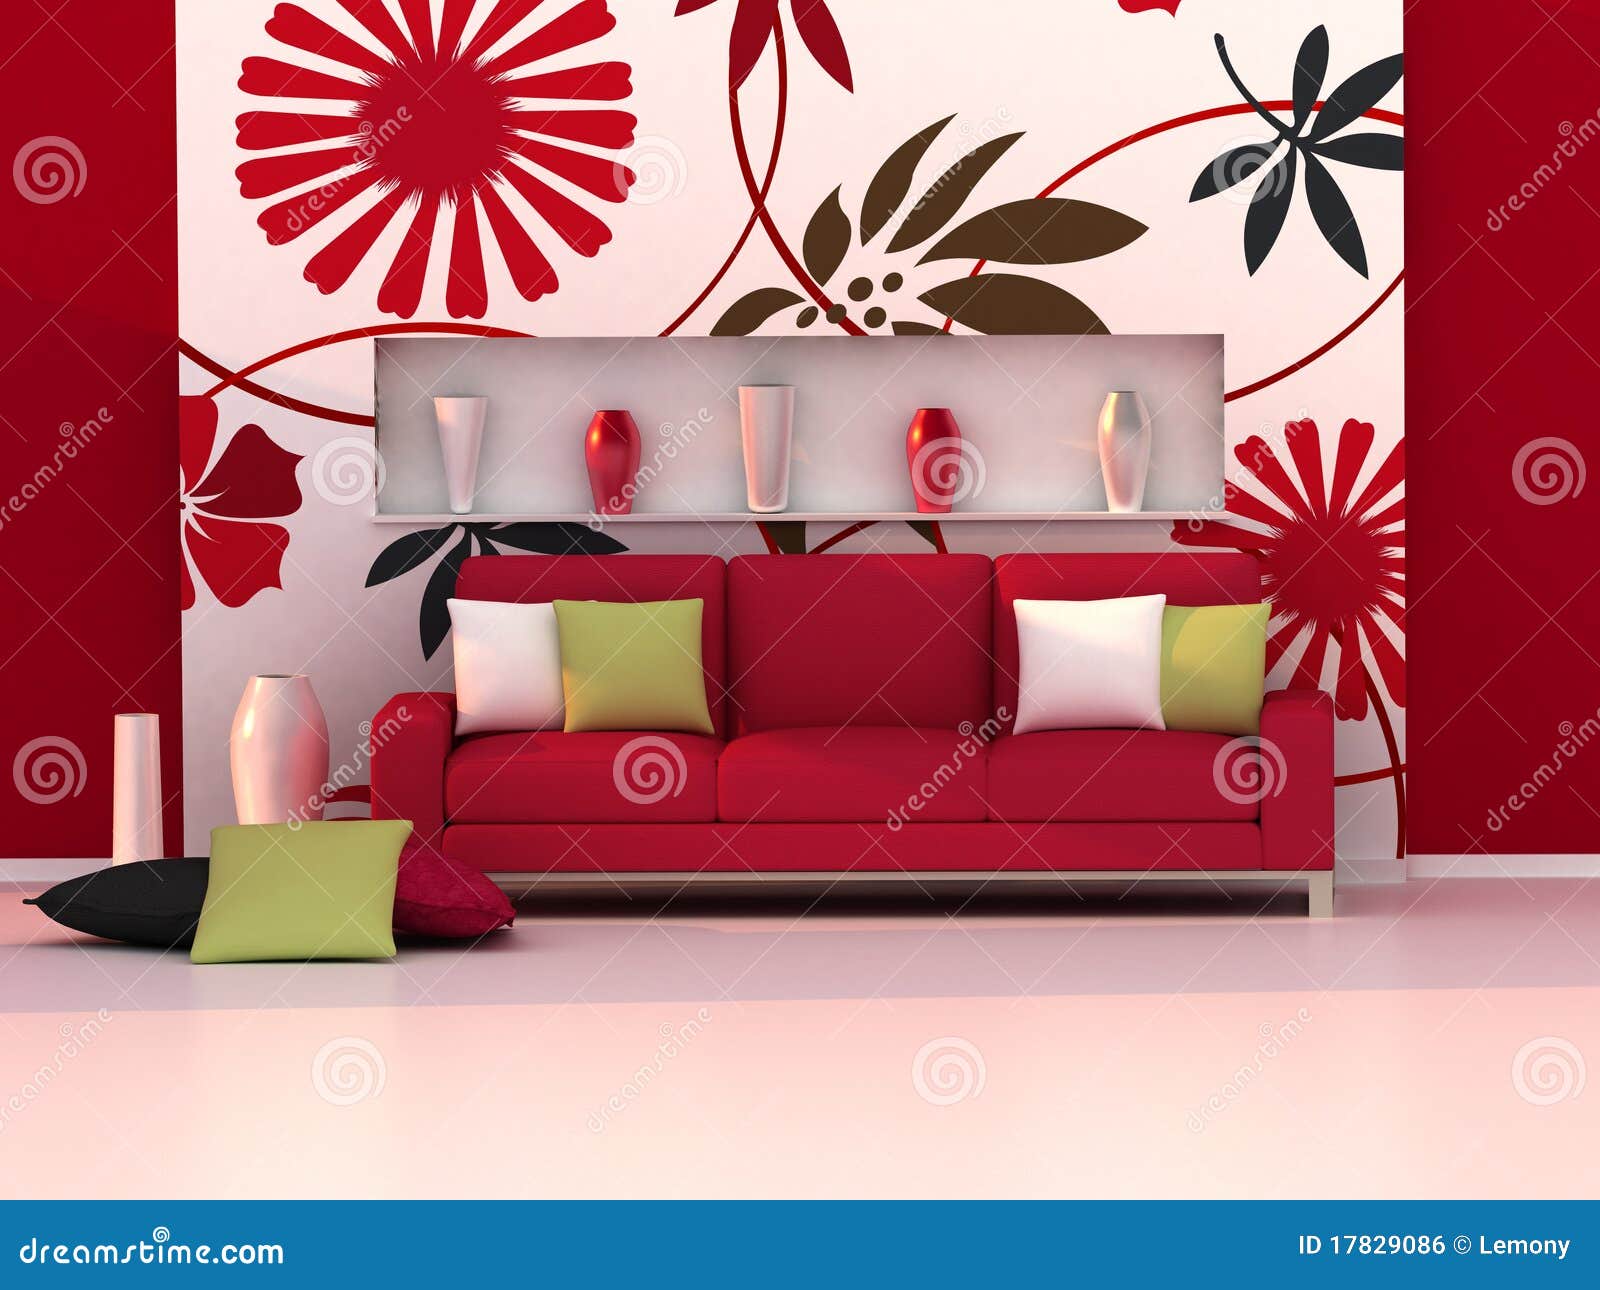  Free Stock Image: Interior of the modern room, floral wall, red sofa | 1300 x 1065 · 136 kB · jpeg